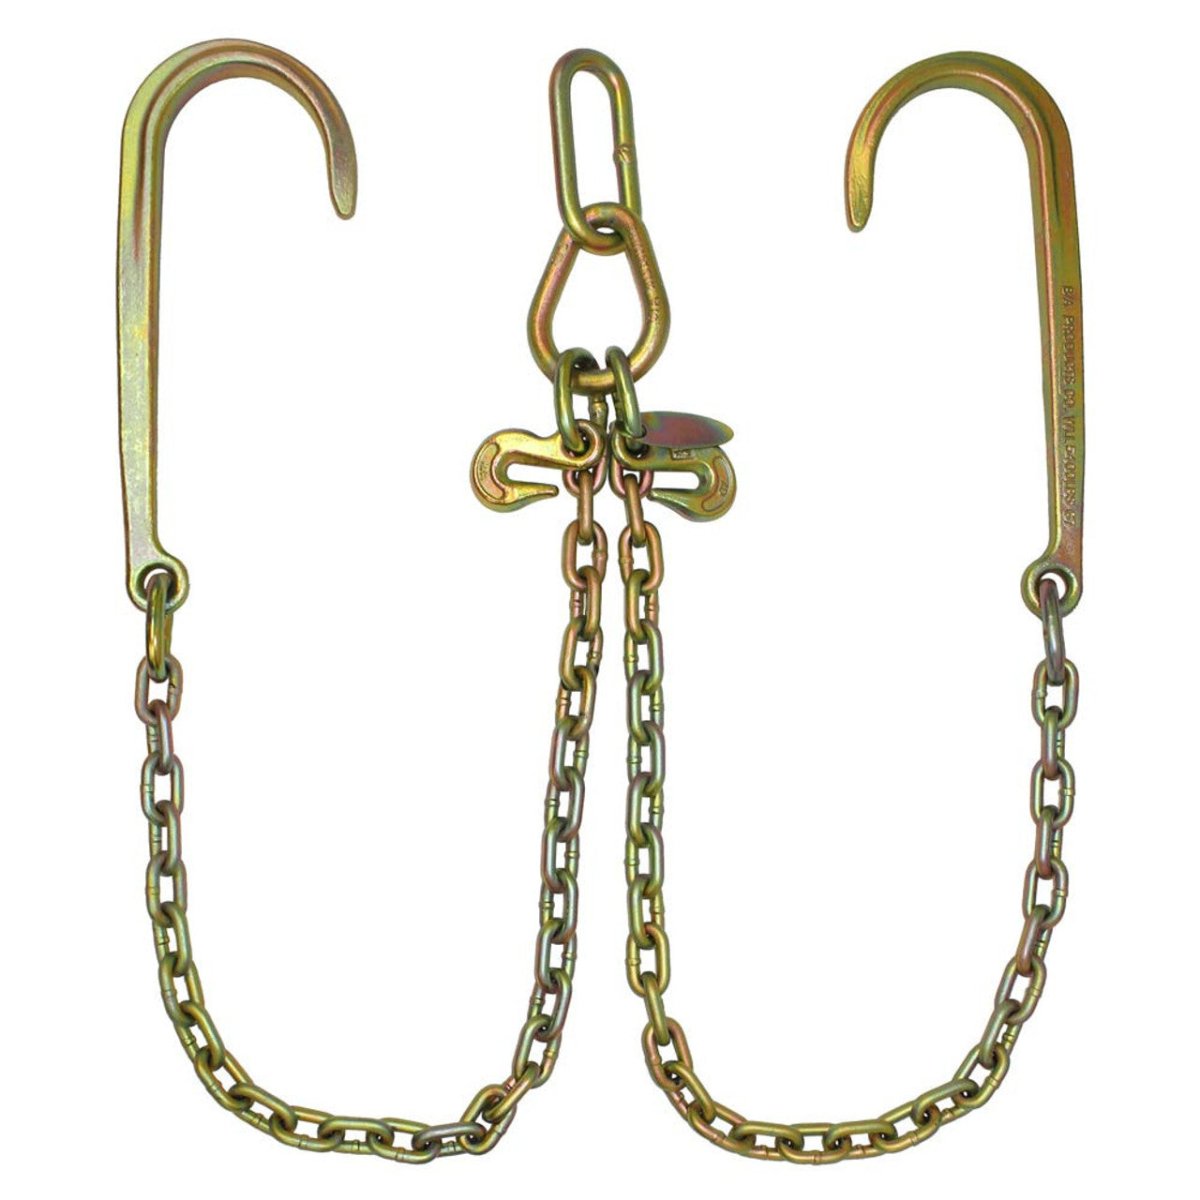 B/A Products Co. 5/16" Low-Profile Grade 70 15" J Hook V-Chain - starequipmentsales